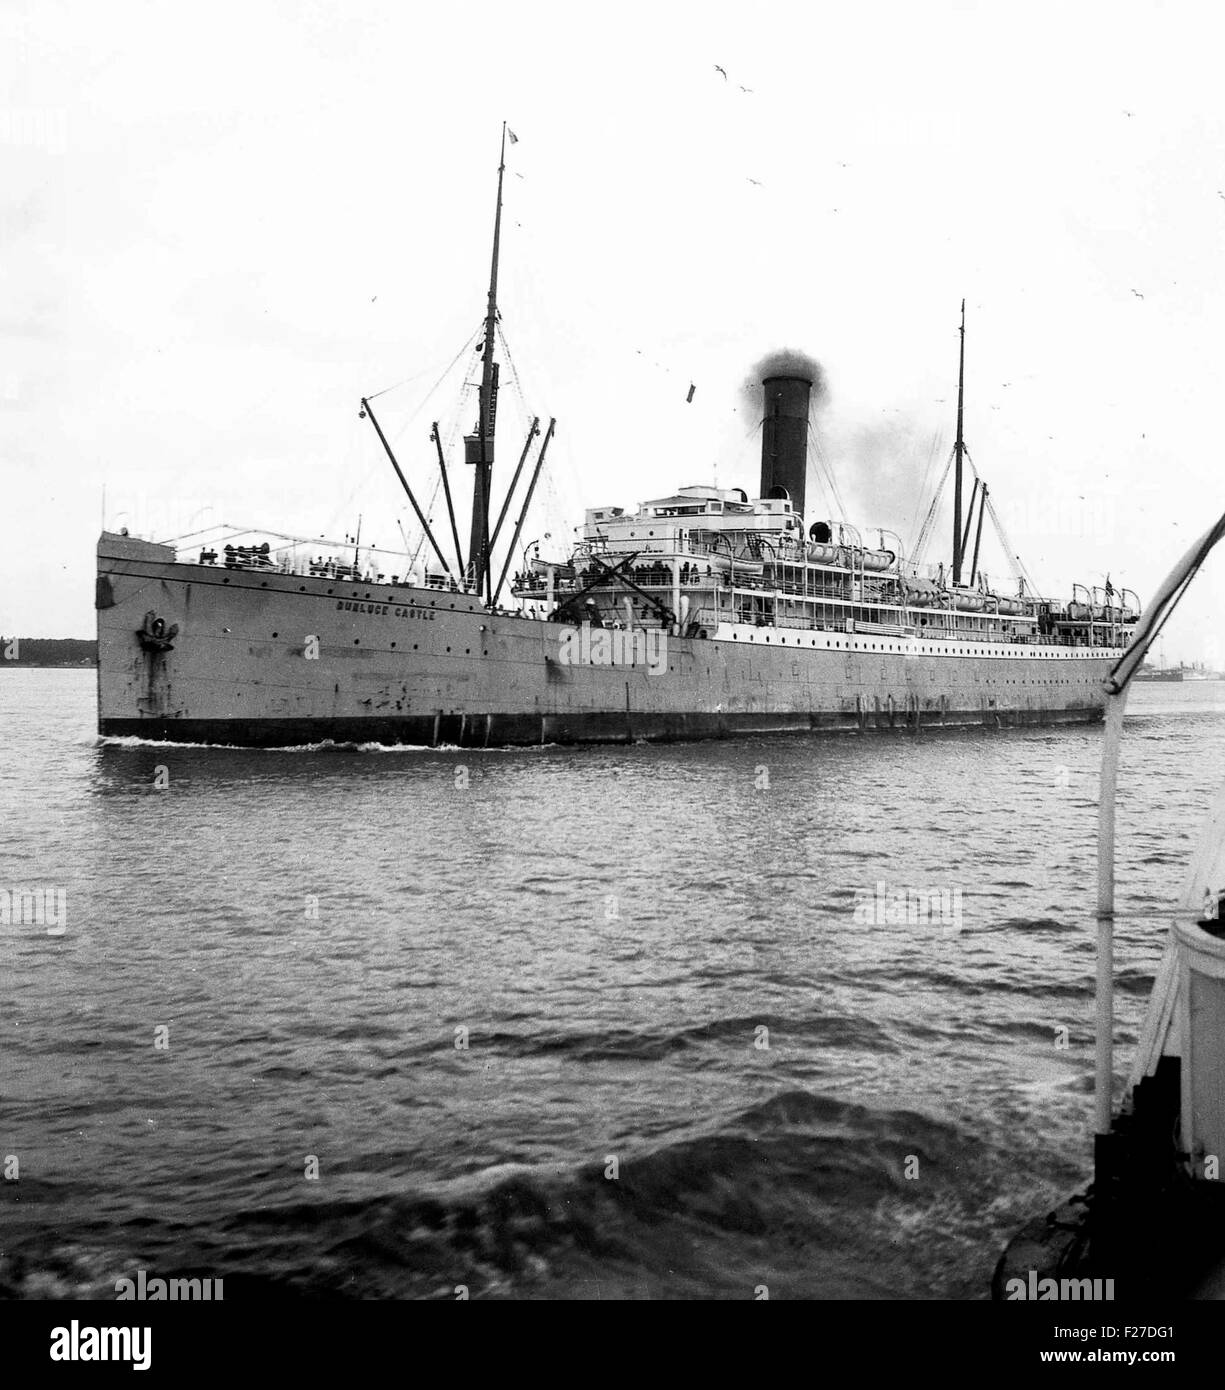 AJAXNETPHOTO.- 1936 - 1938 APPROX. SOUTHAMPTON, ENGLAND. - ROUND THE HARBOUR TRIP - UNION CASTLE LINE'S DUNLUCE CASTLE OUTWARD BOUND FOR AFRICA. BUILT 1904. SERVED AS TROOP AND HOSPITAL SHIP IN WW1. PHOTO:AJAX VINTAGE PICTURE LIBRARY REF:EPS024 1 Stock Photo